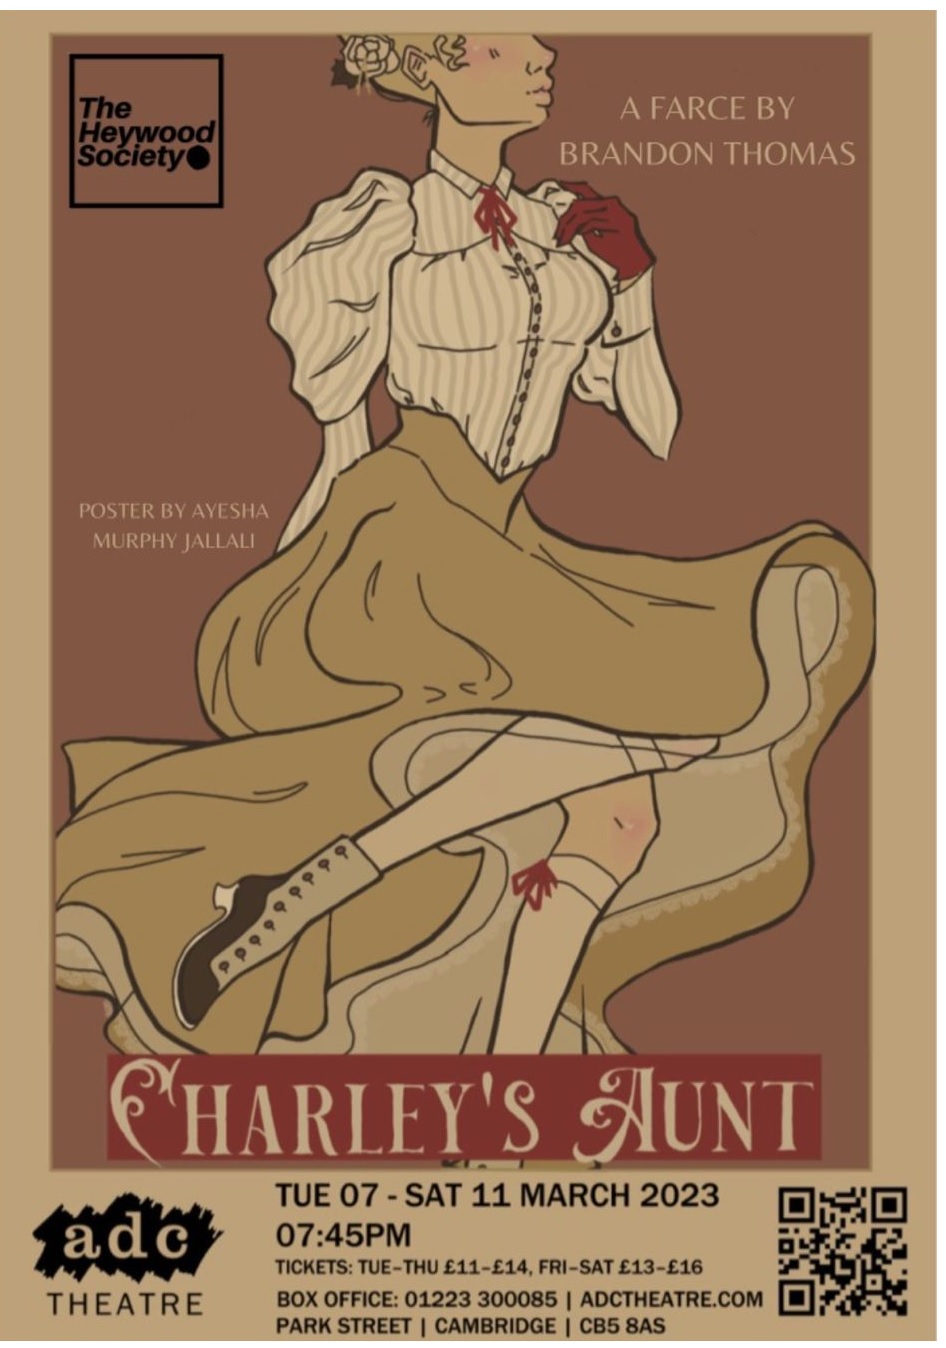 A poster for a production of Charley's Aunt at the ADC Theatre in Cambridge